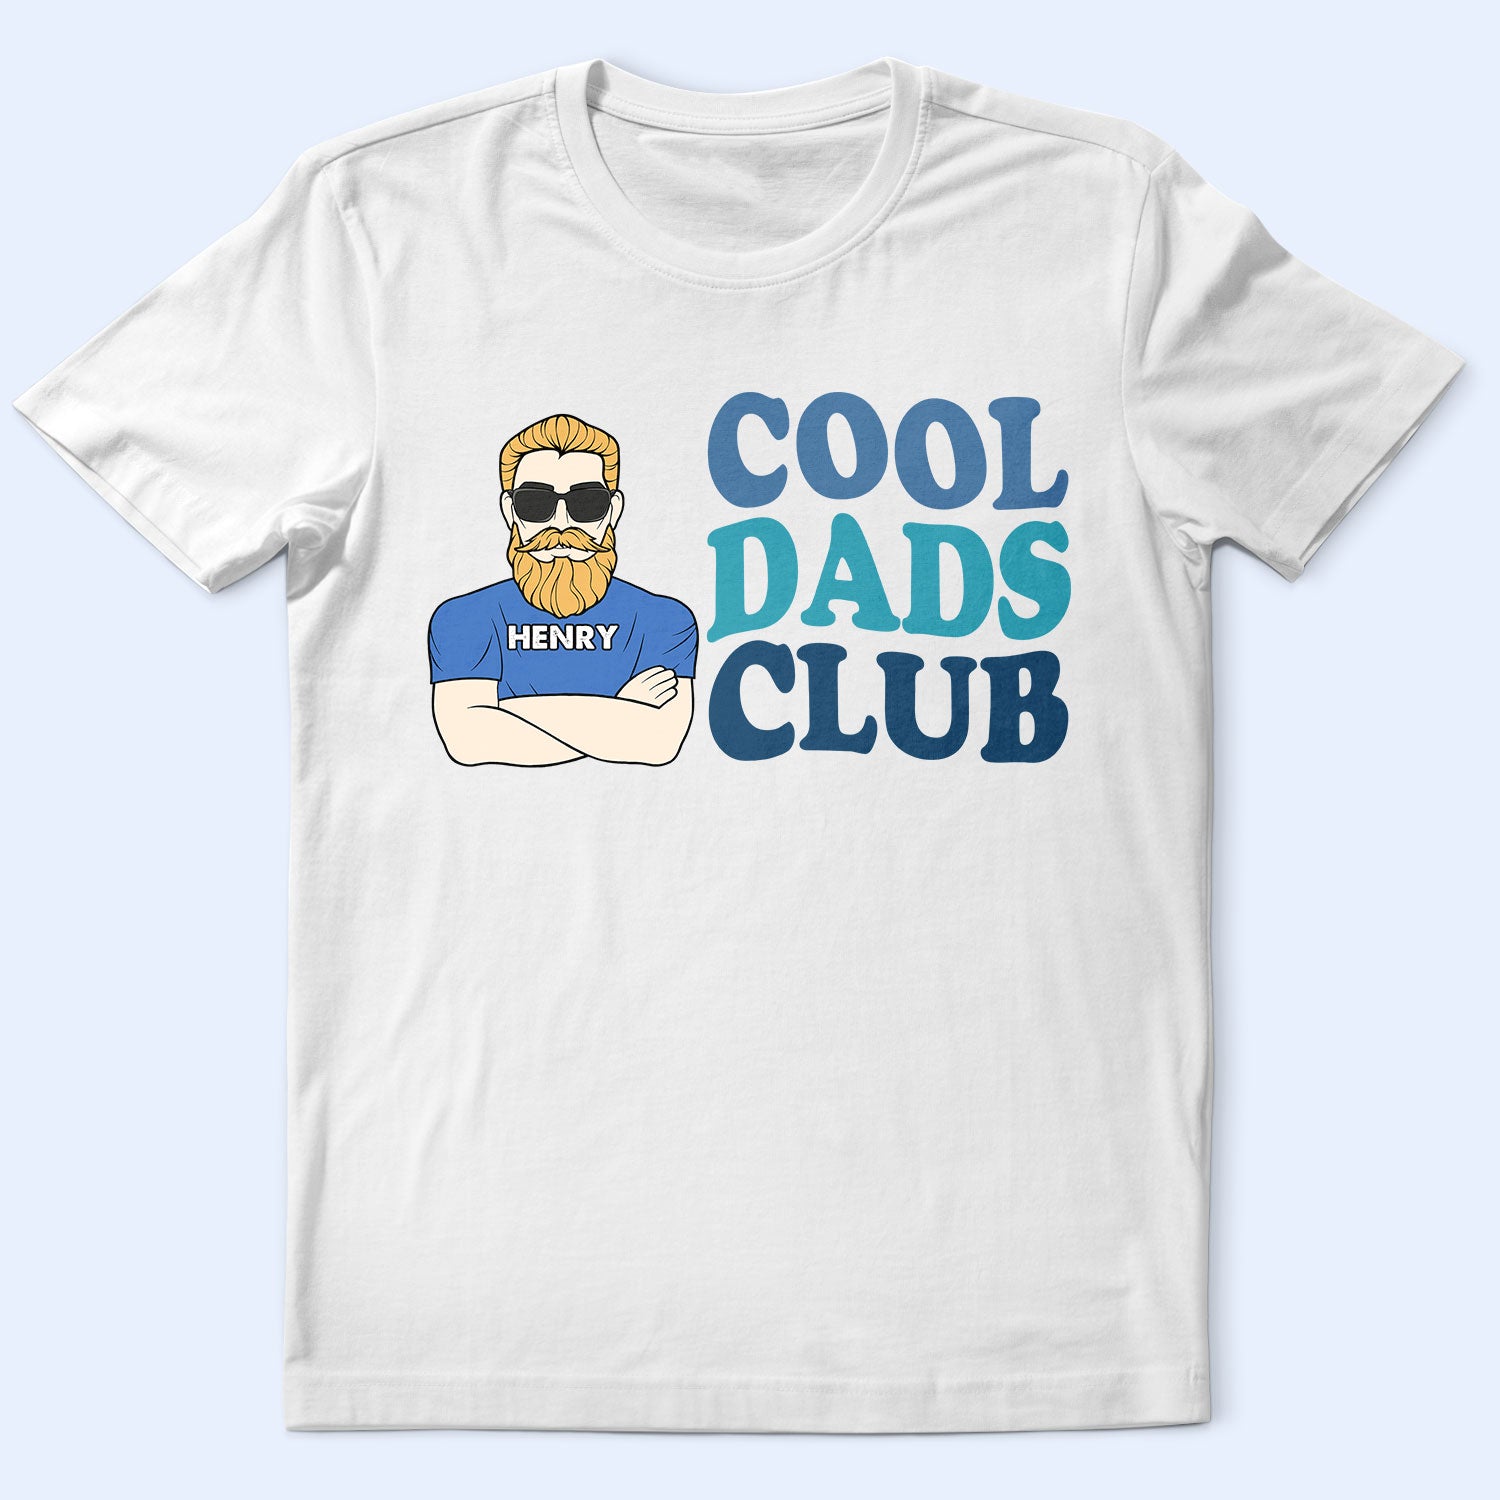 Cool Dads Club - Personalized T Shirt